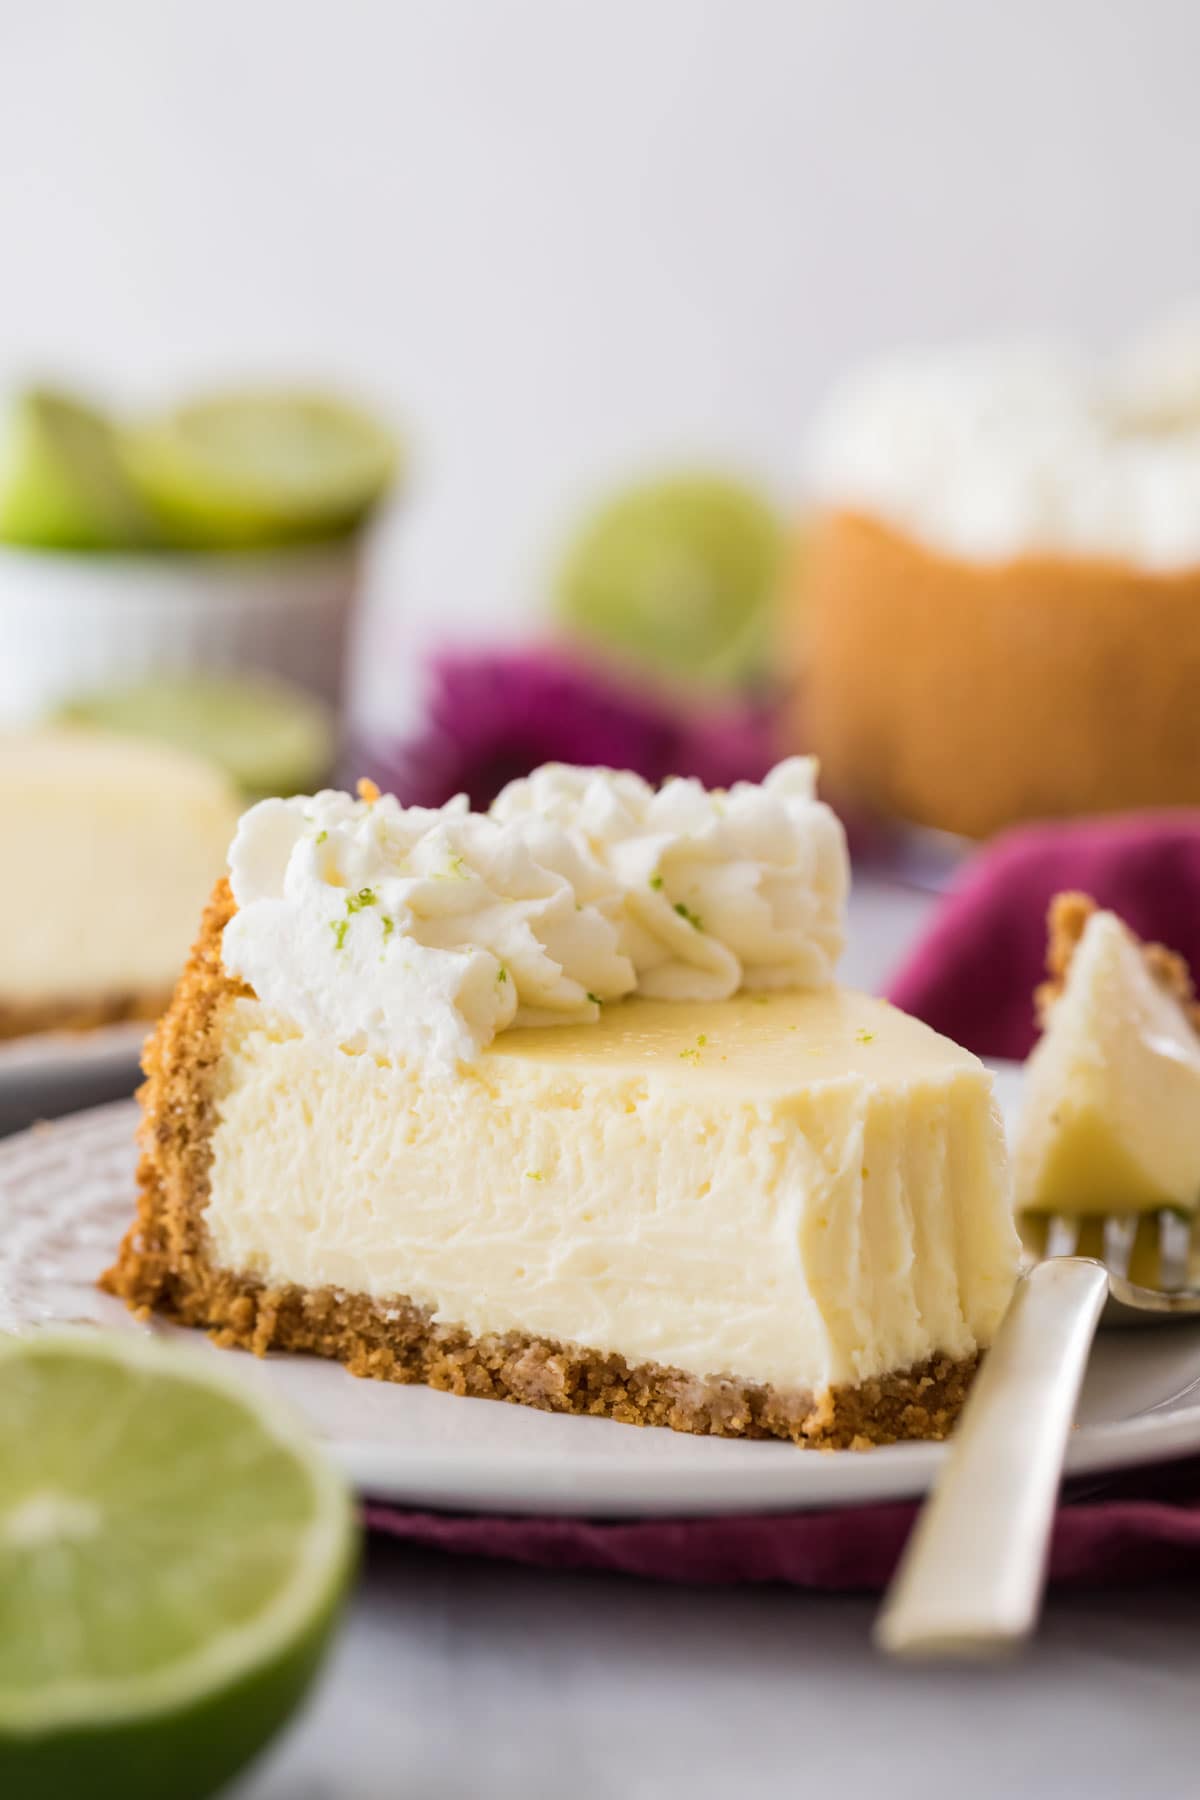 one forkful missing from a slice of cheesecake topped with piped whipped cream and lime zest